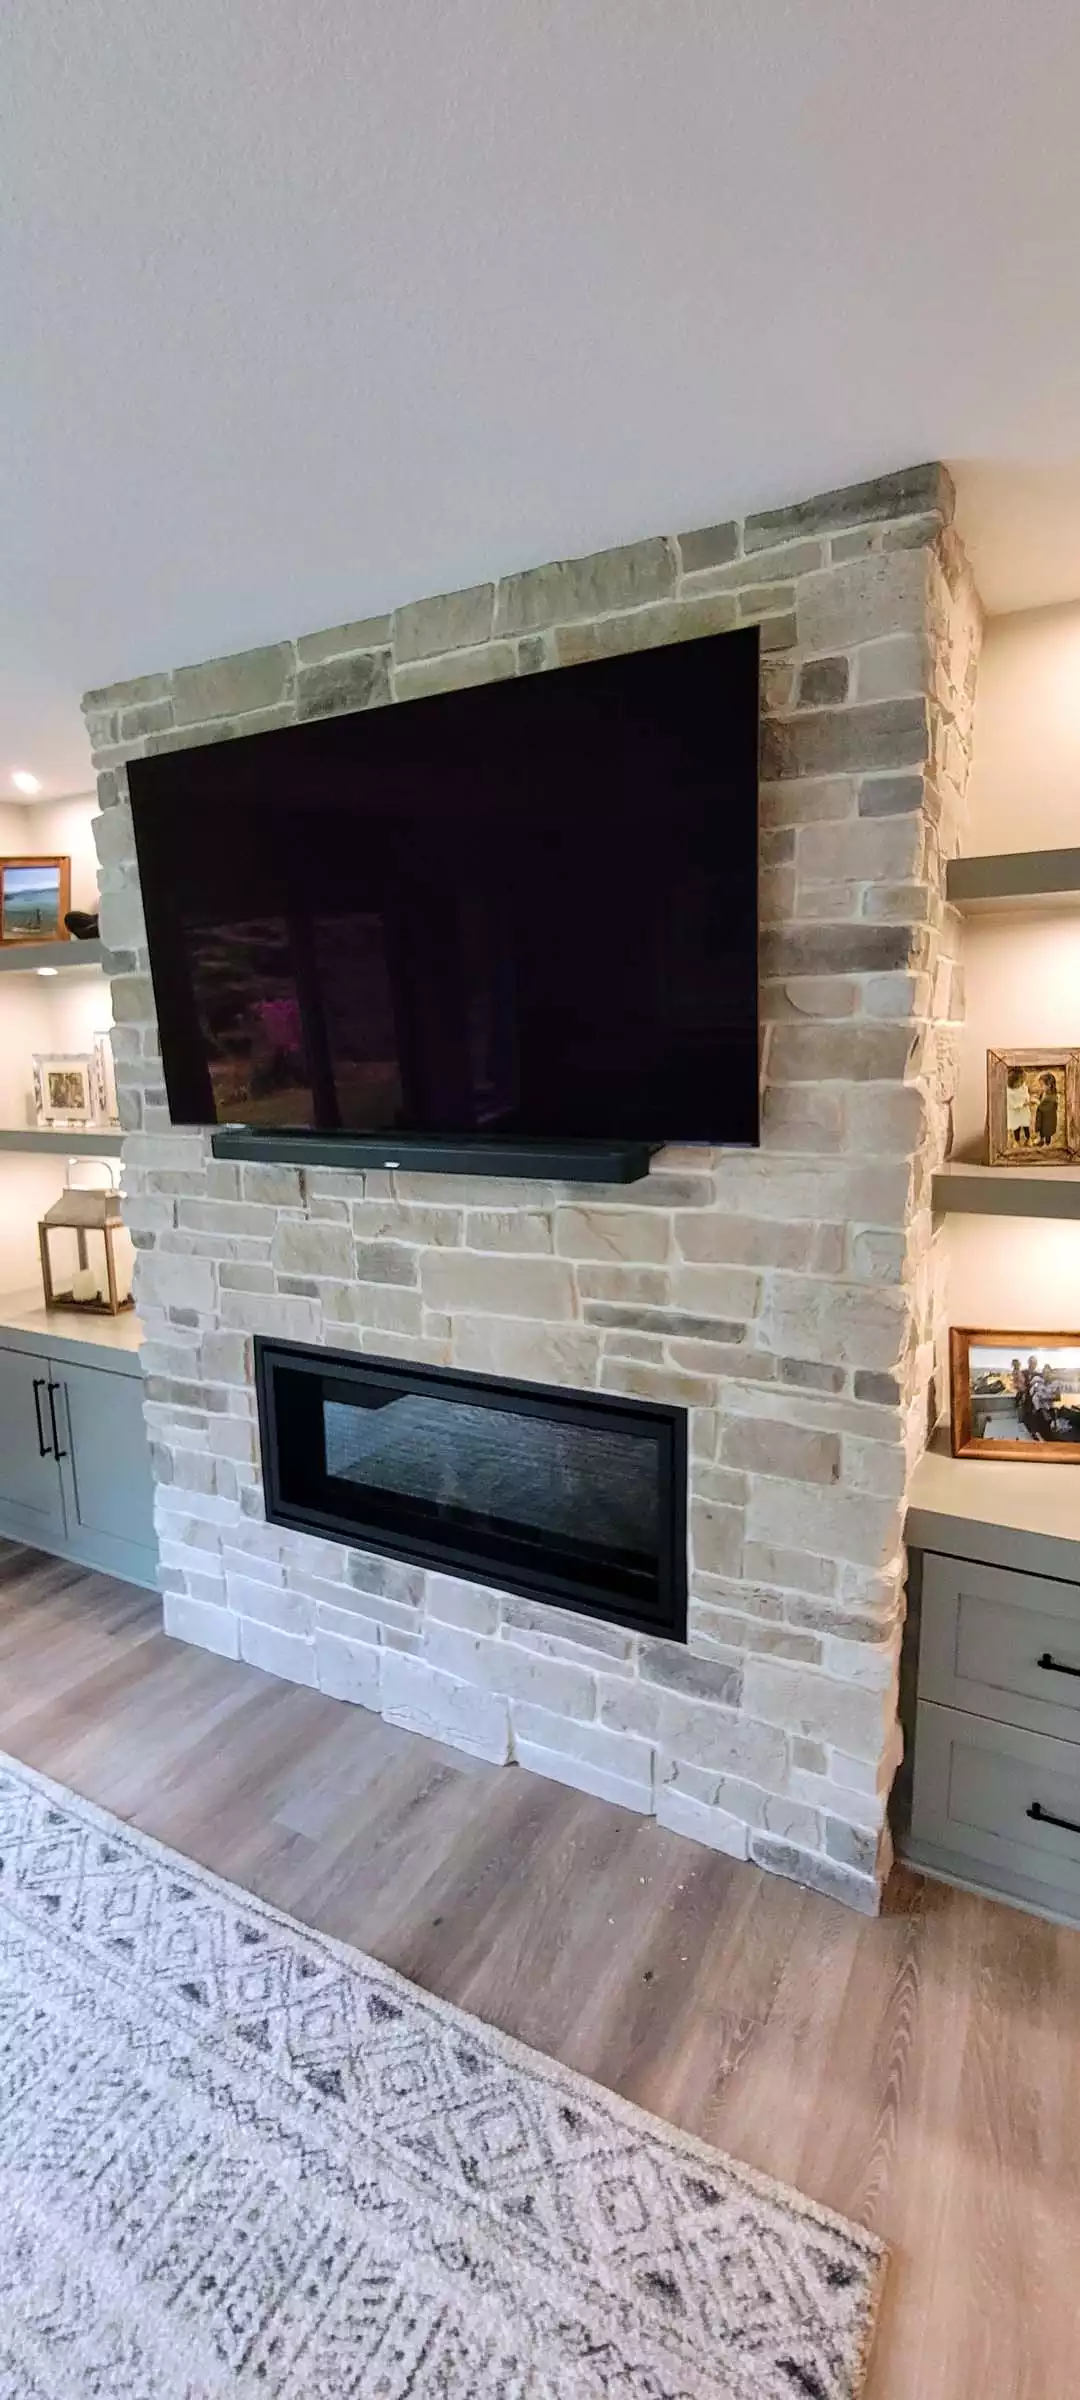 Stone wall gas fireplace with TV above